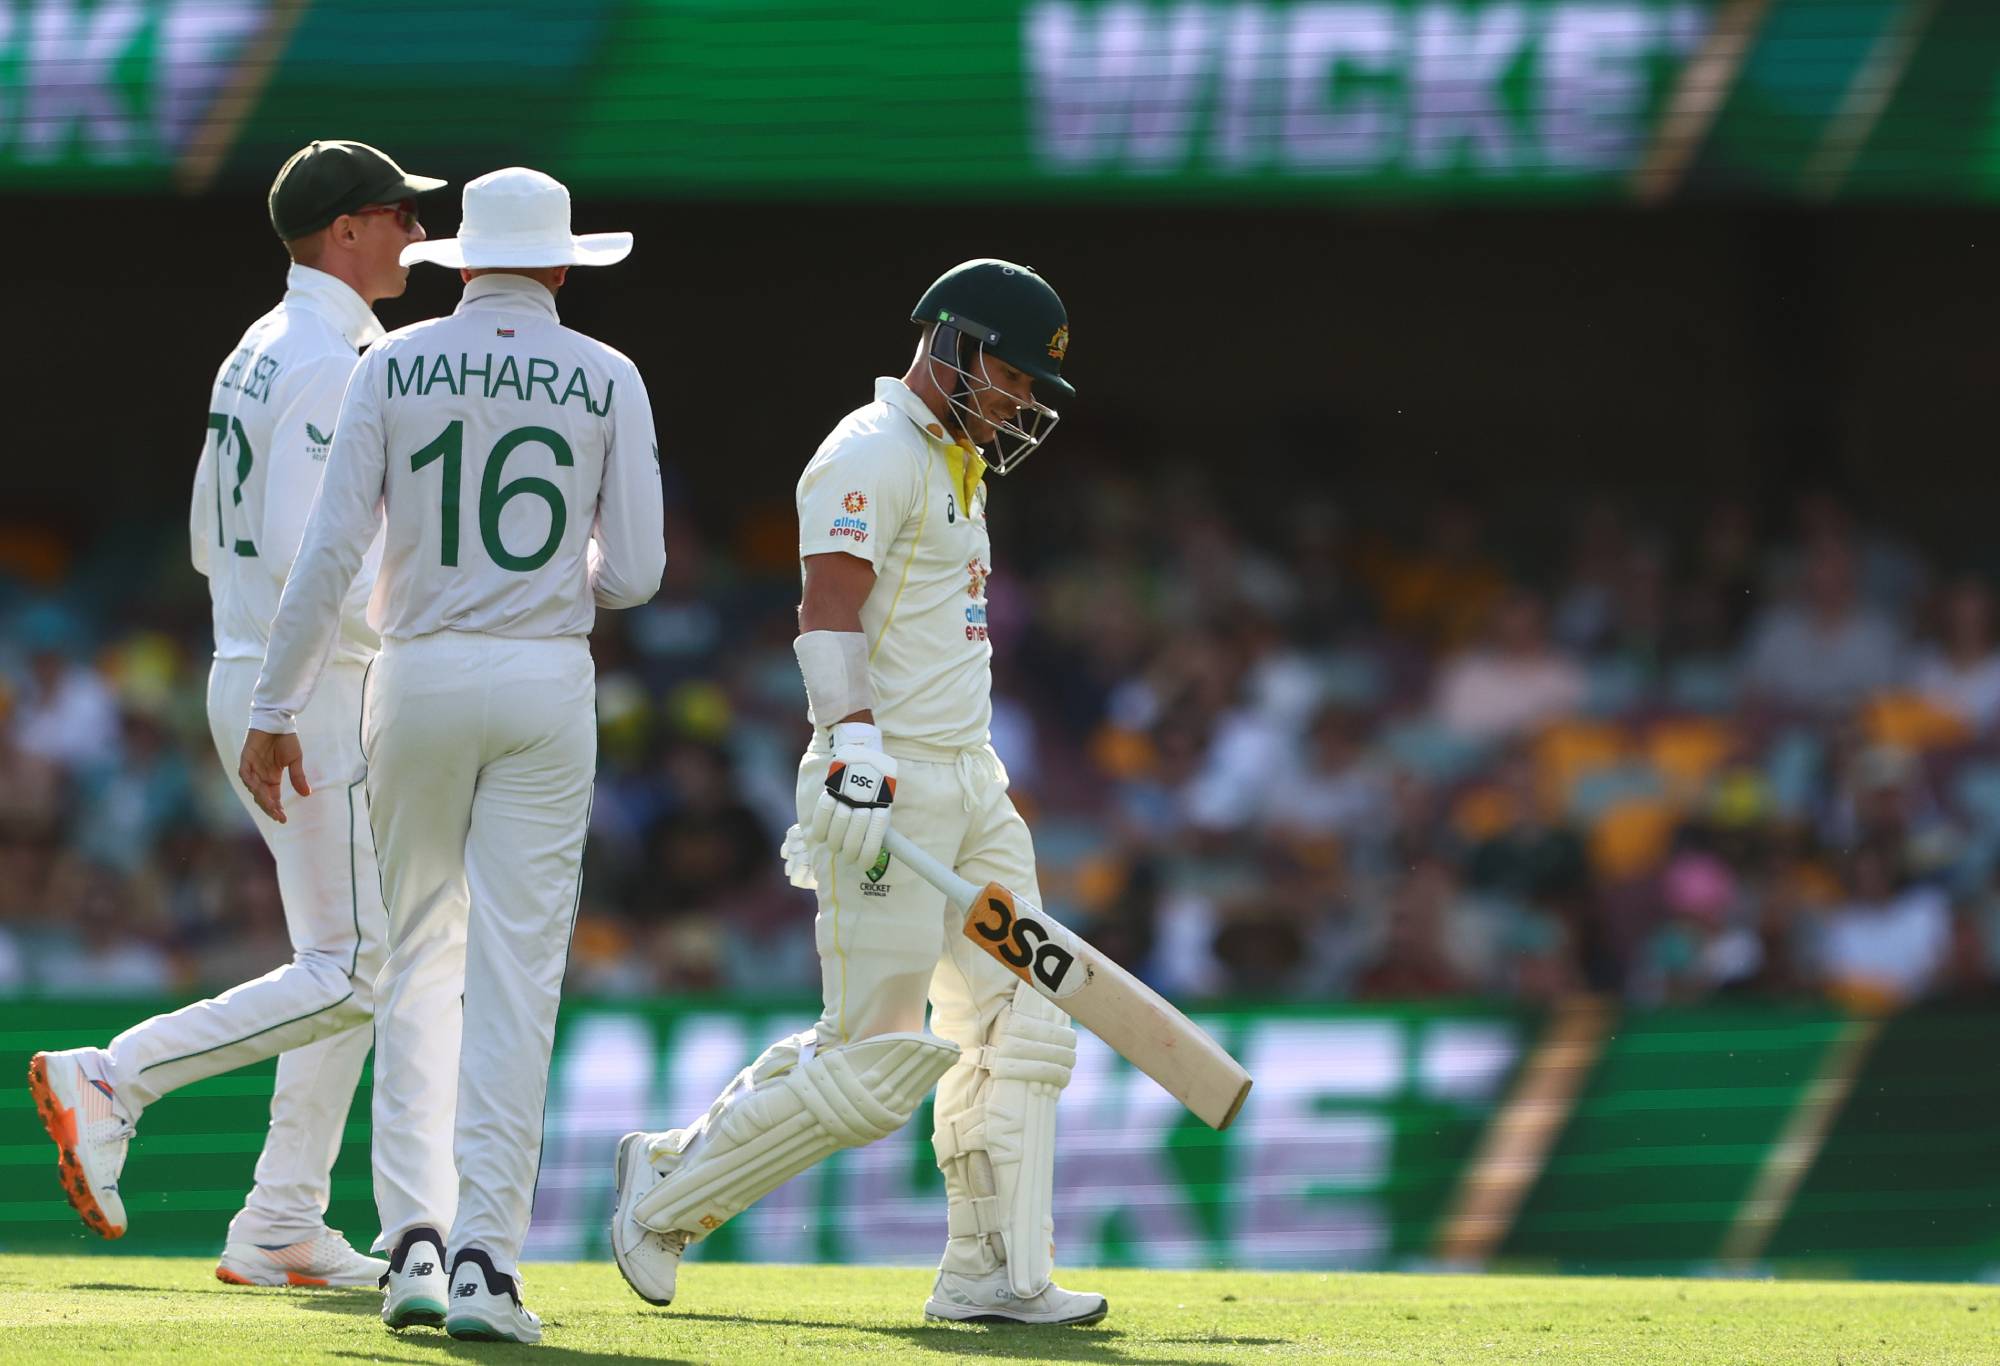 BRISBANE, AUSTRALIA - DECEMBER 18: David Warner of Australia is seen walking from the field after losing his wicket to Kagiso Rabada of South Africa during day two of the First Test match between Australia and South Africa at The Gabba on December 18, 2022 in Brisbane, Australia. (Photo by Chris Hyde - CA/Cricket Australia via Getty Images)